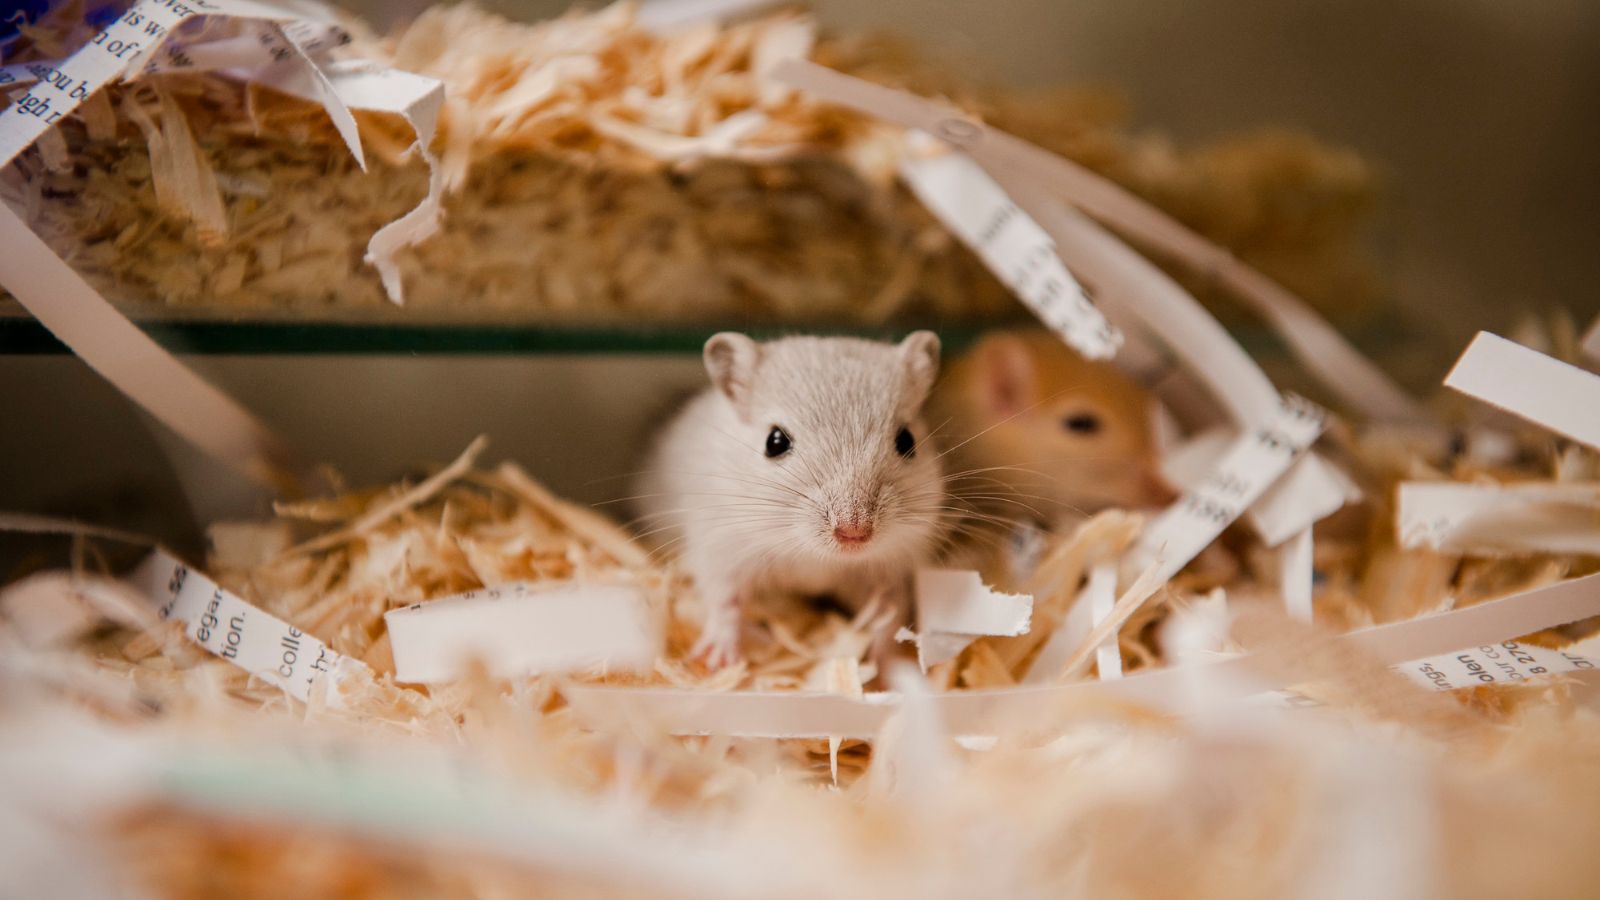 A pair of baby gerbils peer out of their shredded newspaper bedding.